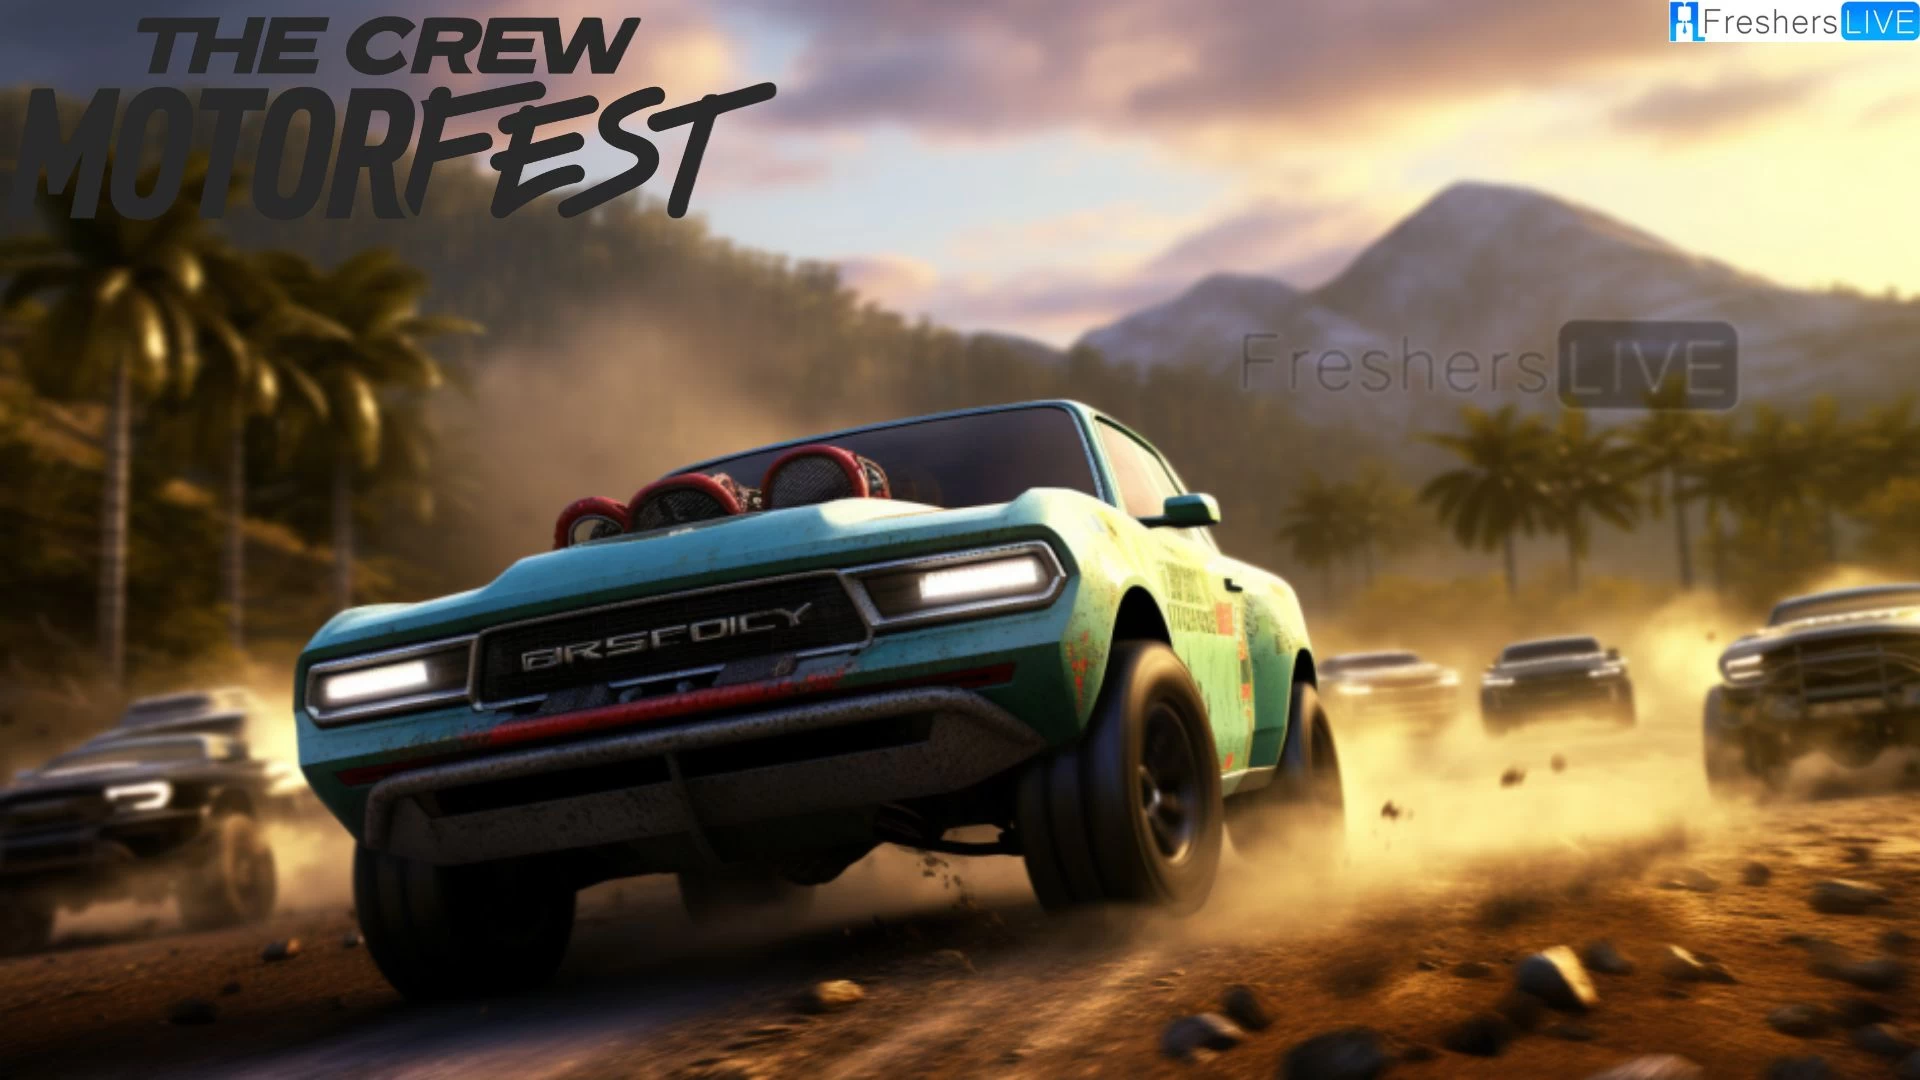 Is The Crew Motorfest Open World? Check the Gameplay, Review, Trailer and more